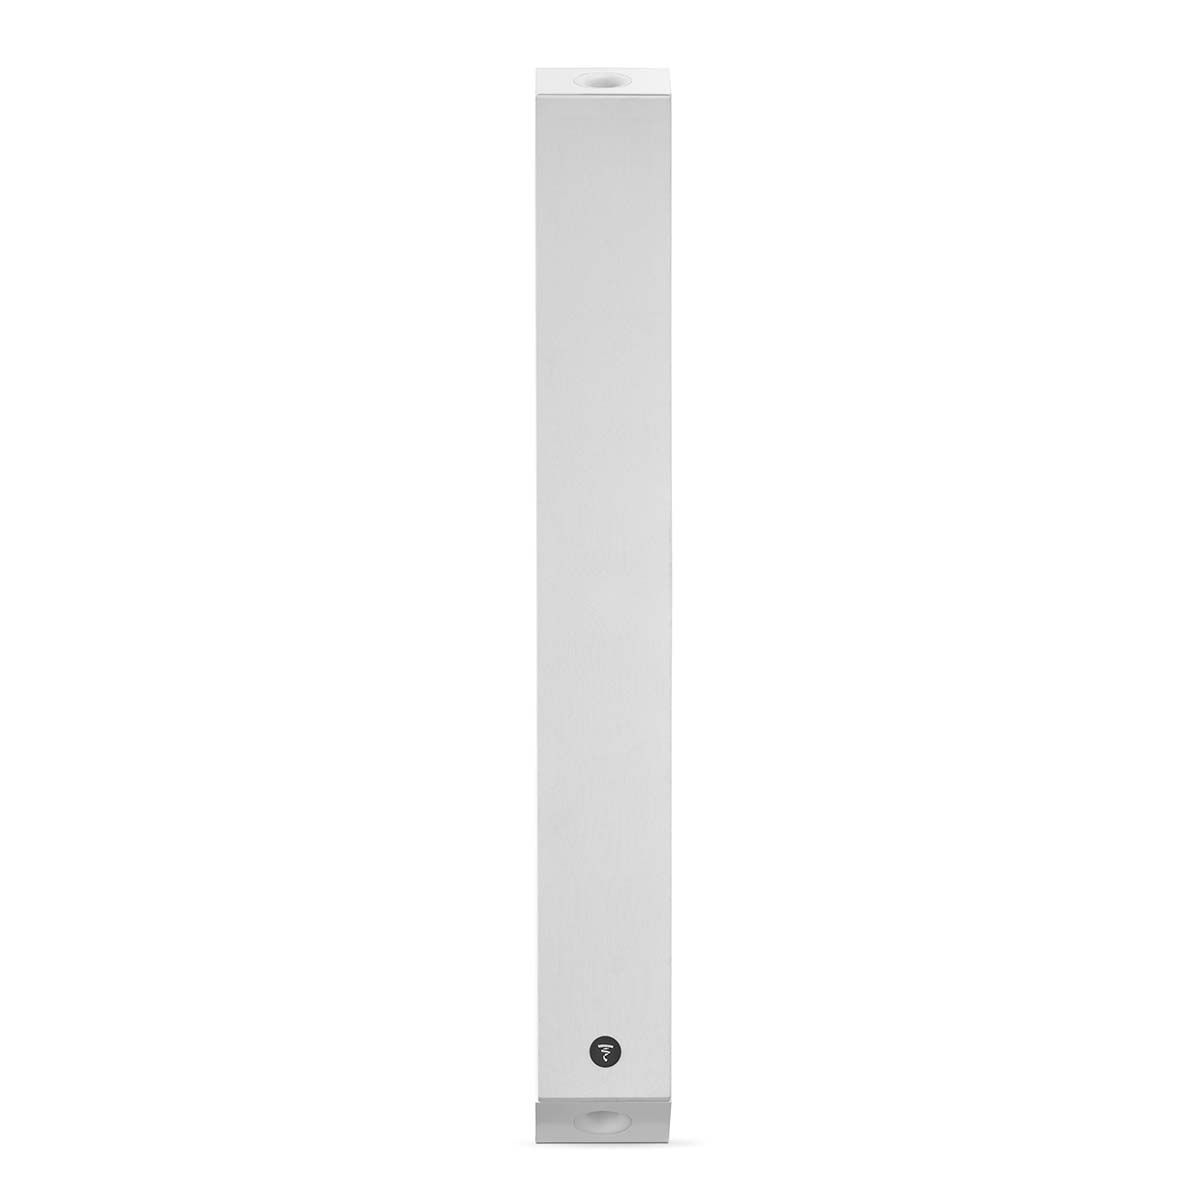 Focal On Wall 302 Speaker, Gloss White, vertical front view with grille